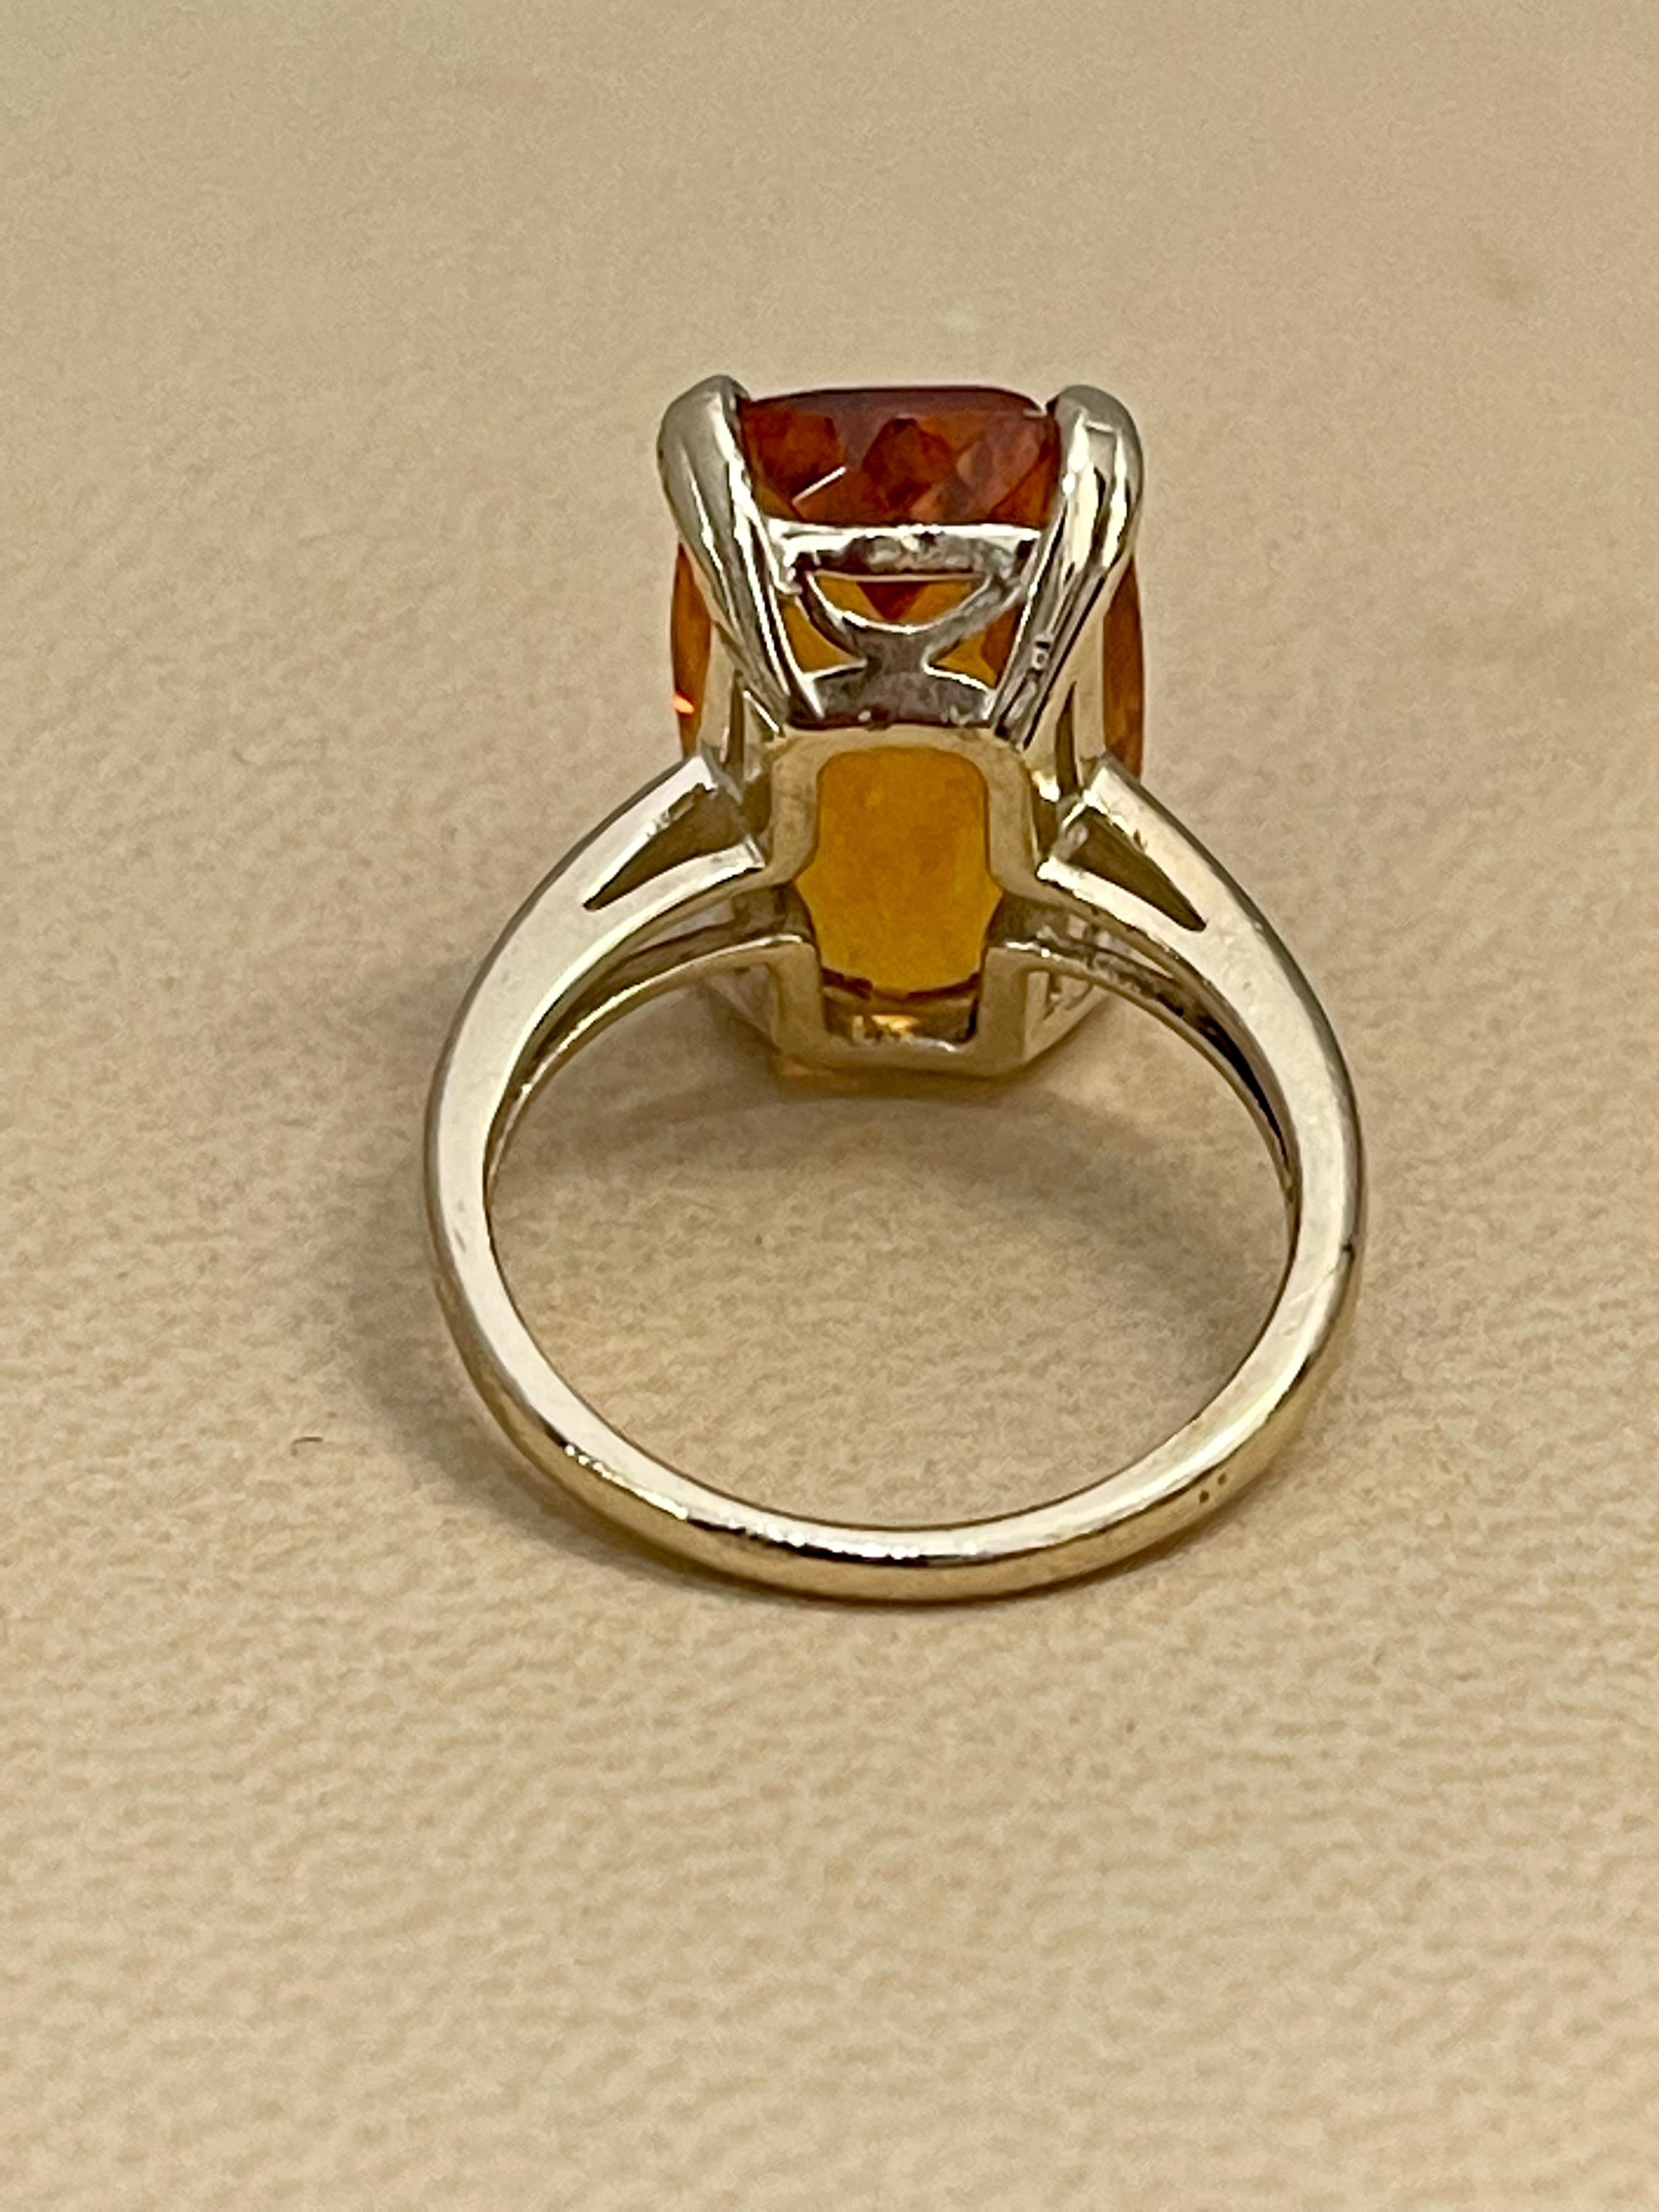 6 Carat Natural Long Cushion Shape Citrine Cocktail Ring in 14 Karat Yellow Gold In Excellent Condition For Sale In New York, NY